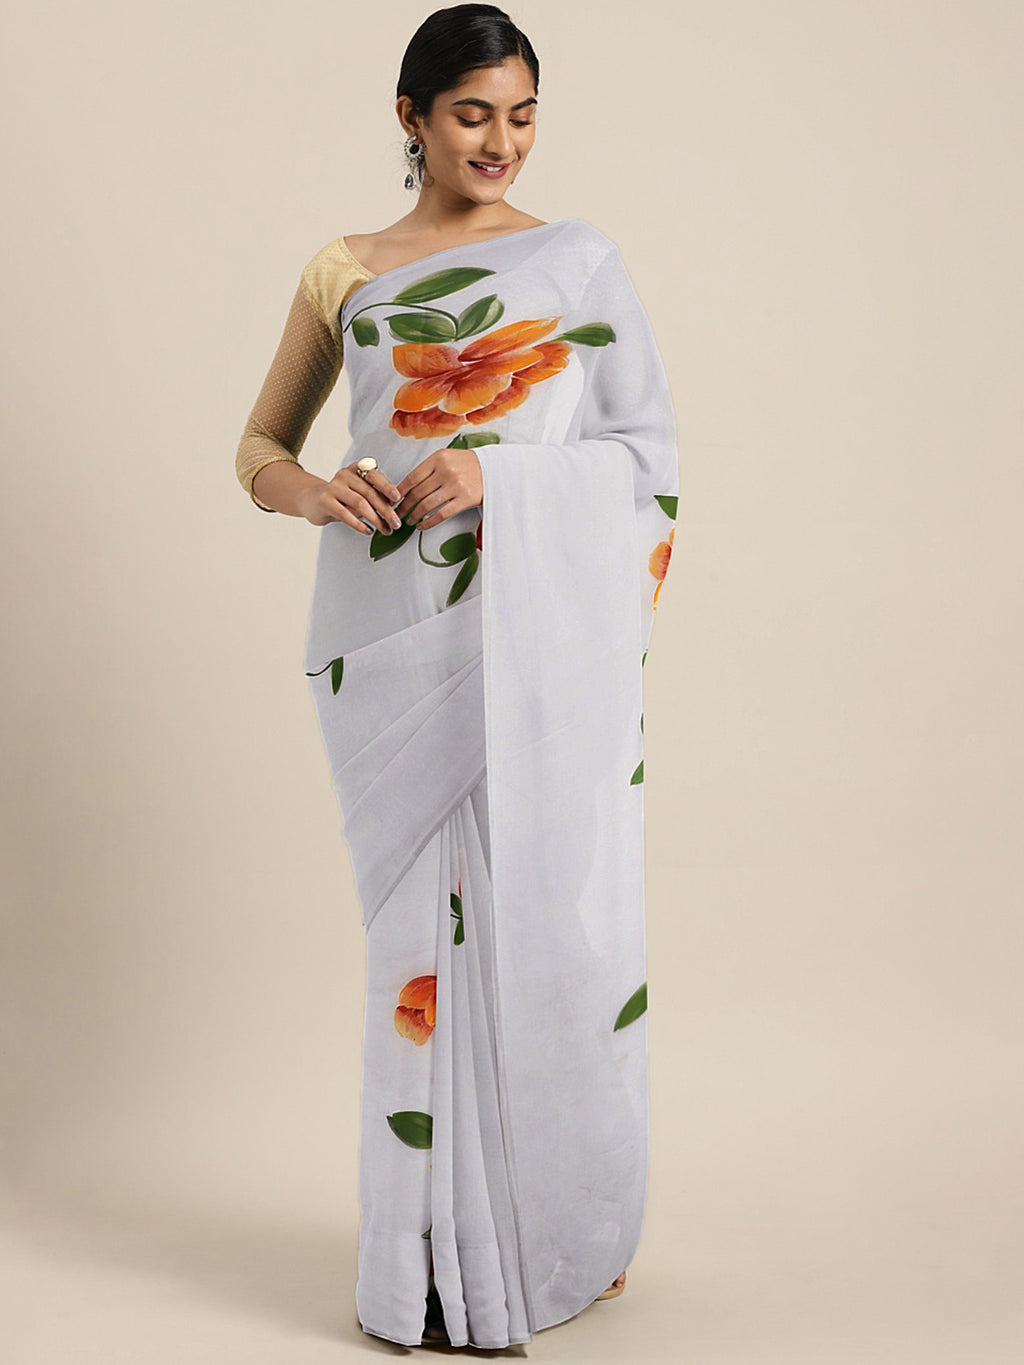 Kalakari India Organza Hand Painted Saree With Blouse BHKPSA0159-Saree-Kalakari India-BHKPSA0159-Bollywood, Fashion, Geographical Indication, Hand Crafted, Heritage Prints, Natural Dyes, Organza, Sarees, Sustainable Fabrics, Woven-[Linen,Ethnic,wear,Fashionista,Handloom,Handicraft,Indigo,blockprint,block,print,Cotton,Chanderi,Blue, latest,classy,party,bollywood,trendy,summer,style,traditional,formal,elegant,unique,style,hand,block,print, dabu,booti,gift,present,glamorous,affordable,collectible,S